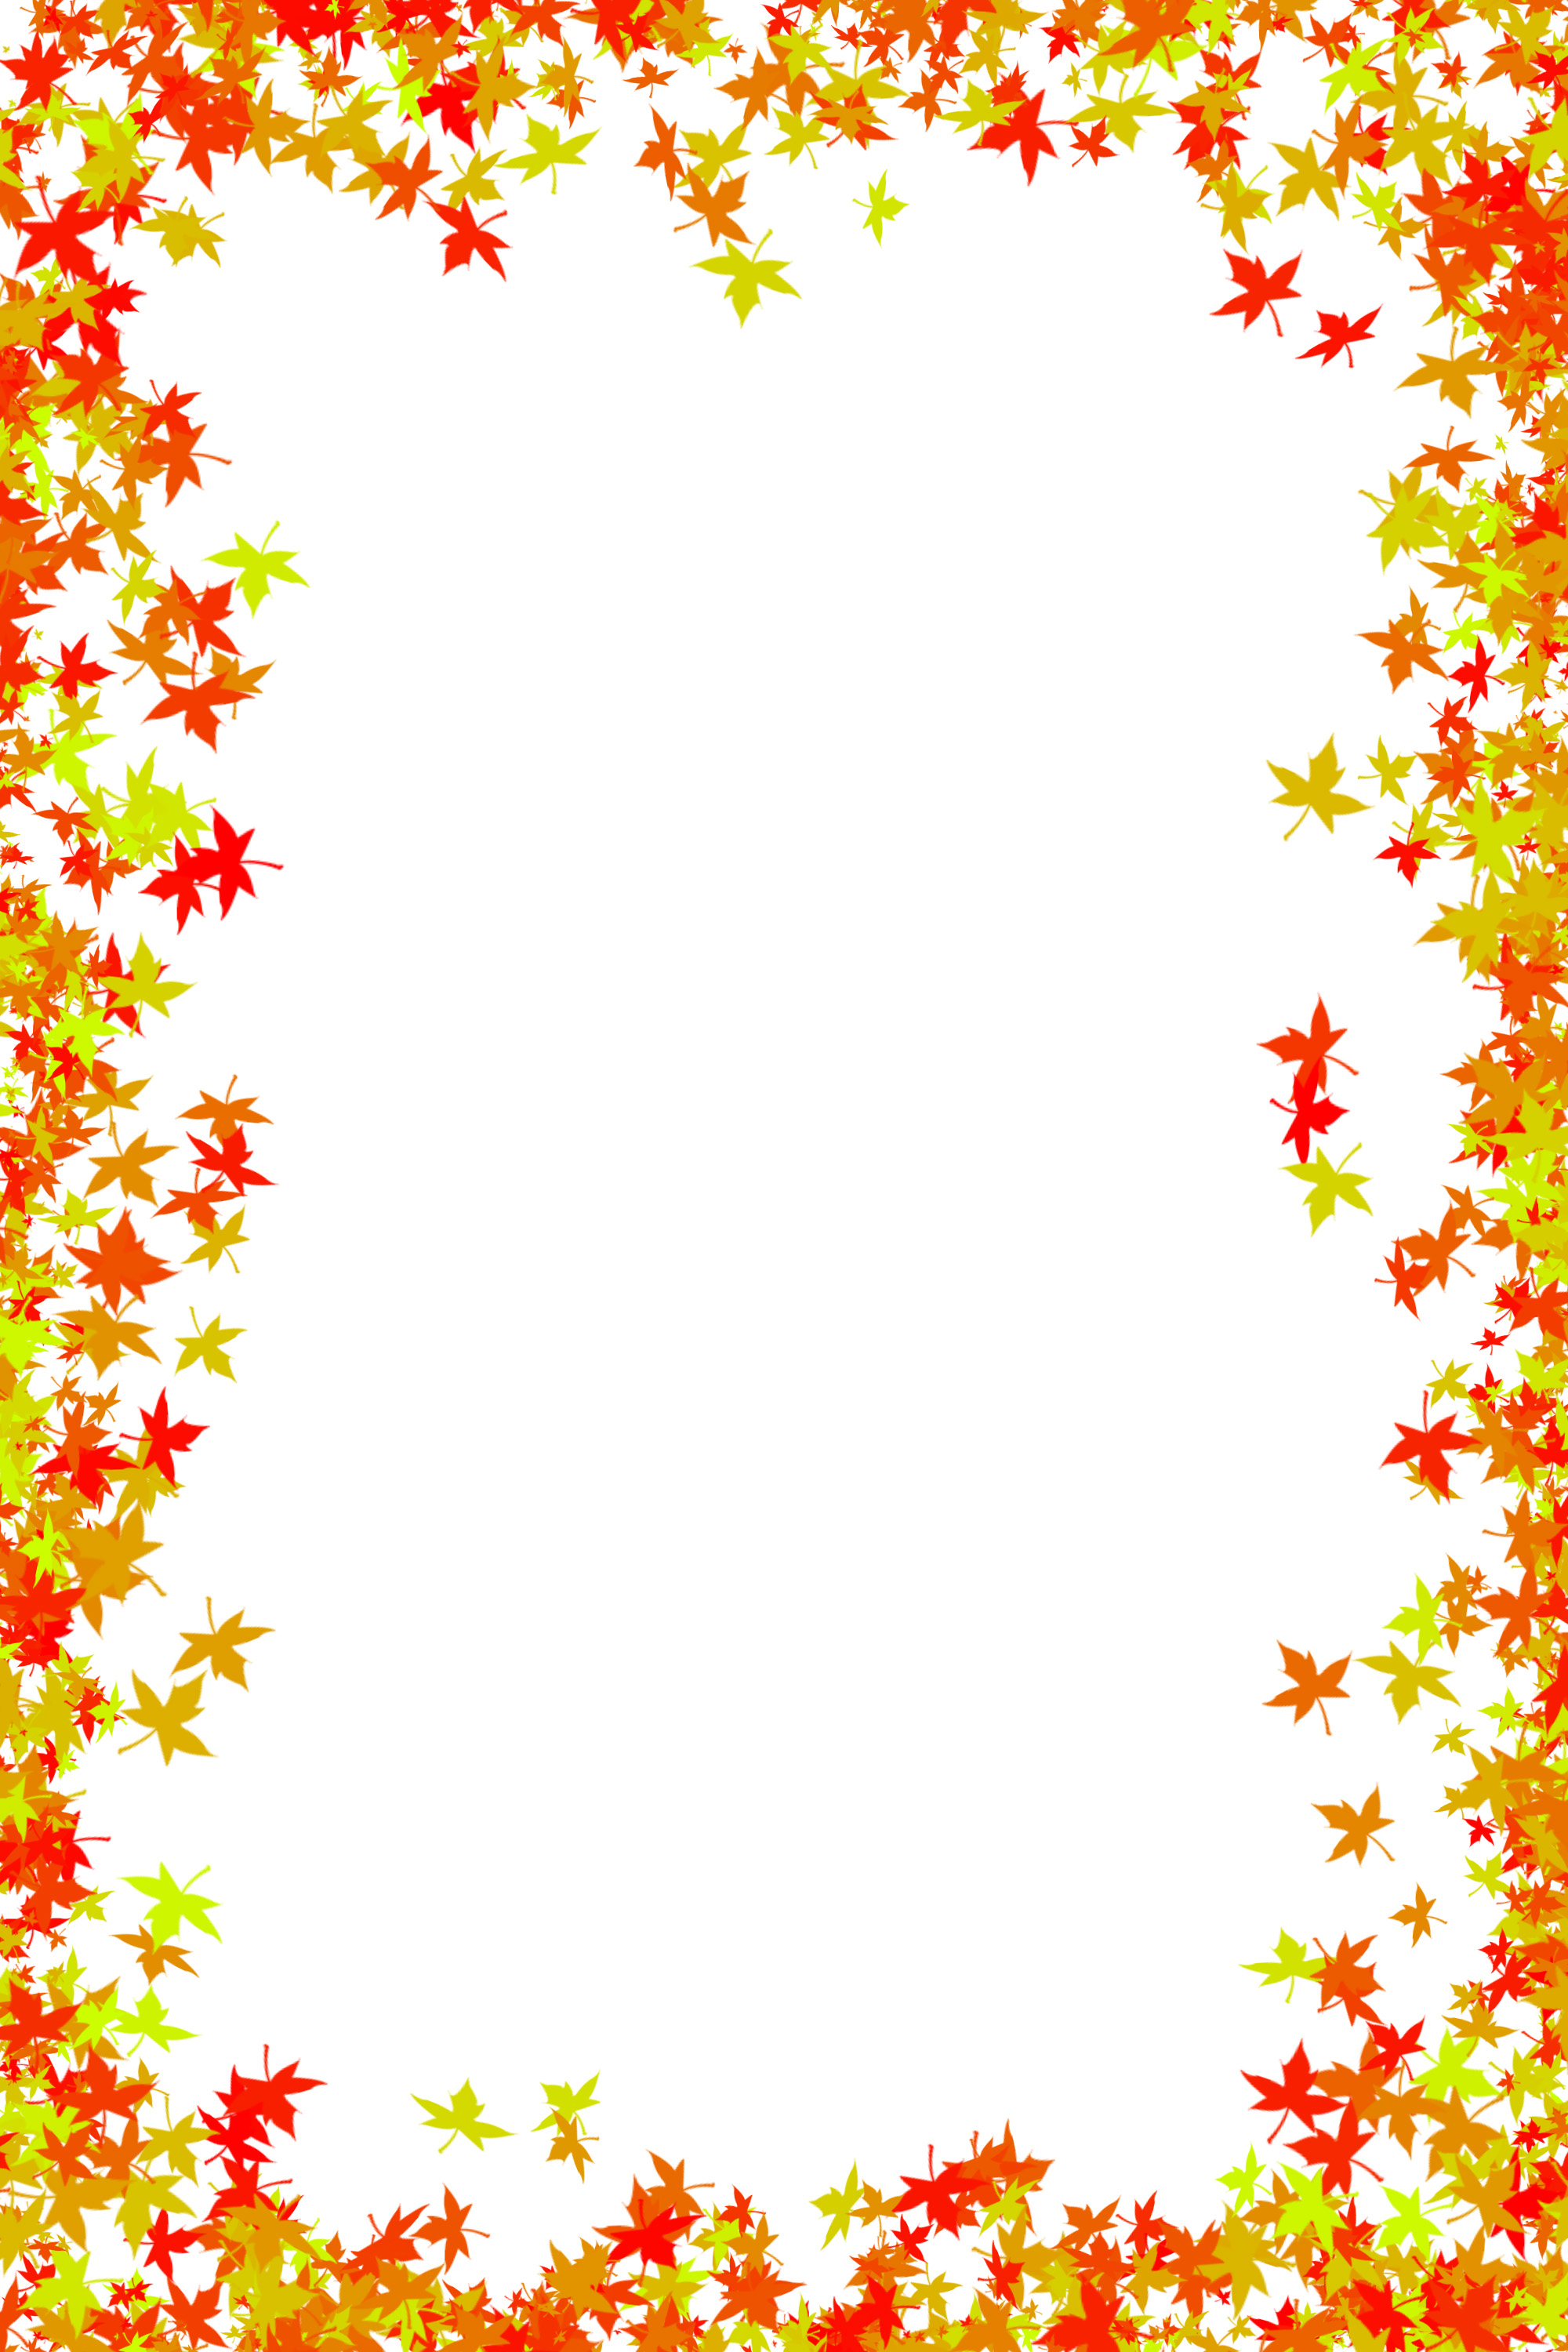 free clipart of fall scenes - photo #43